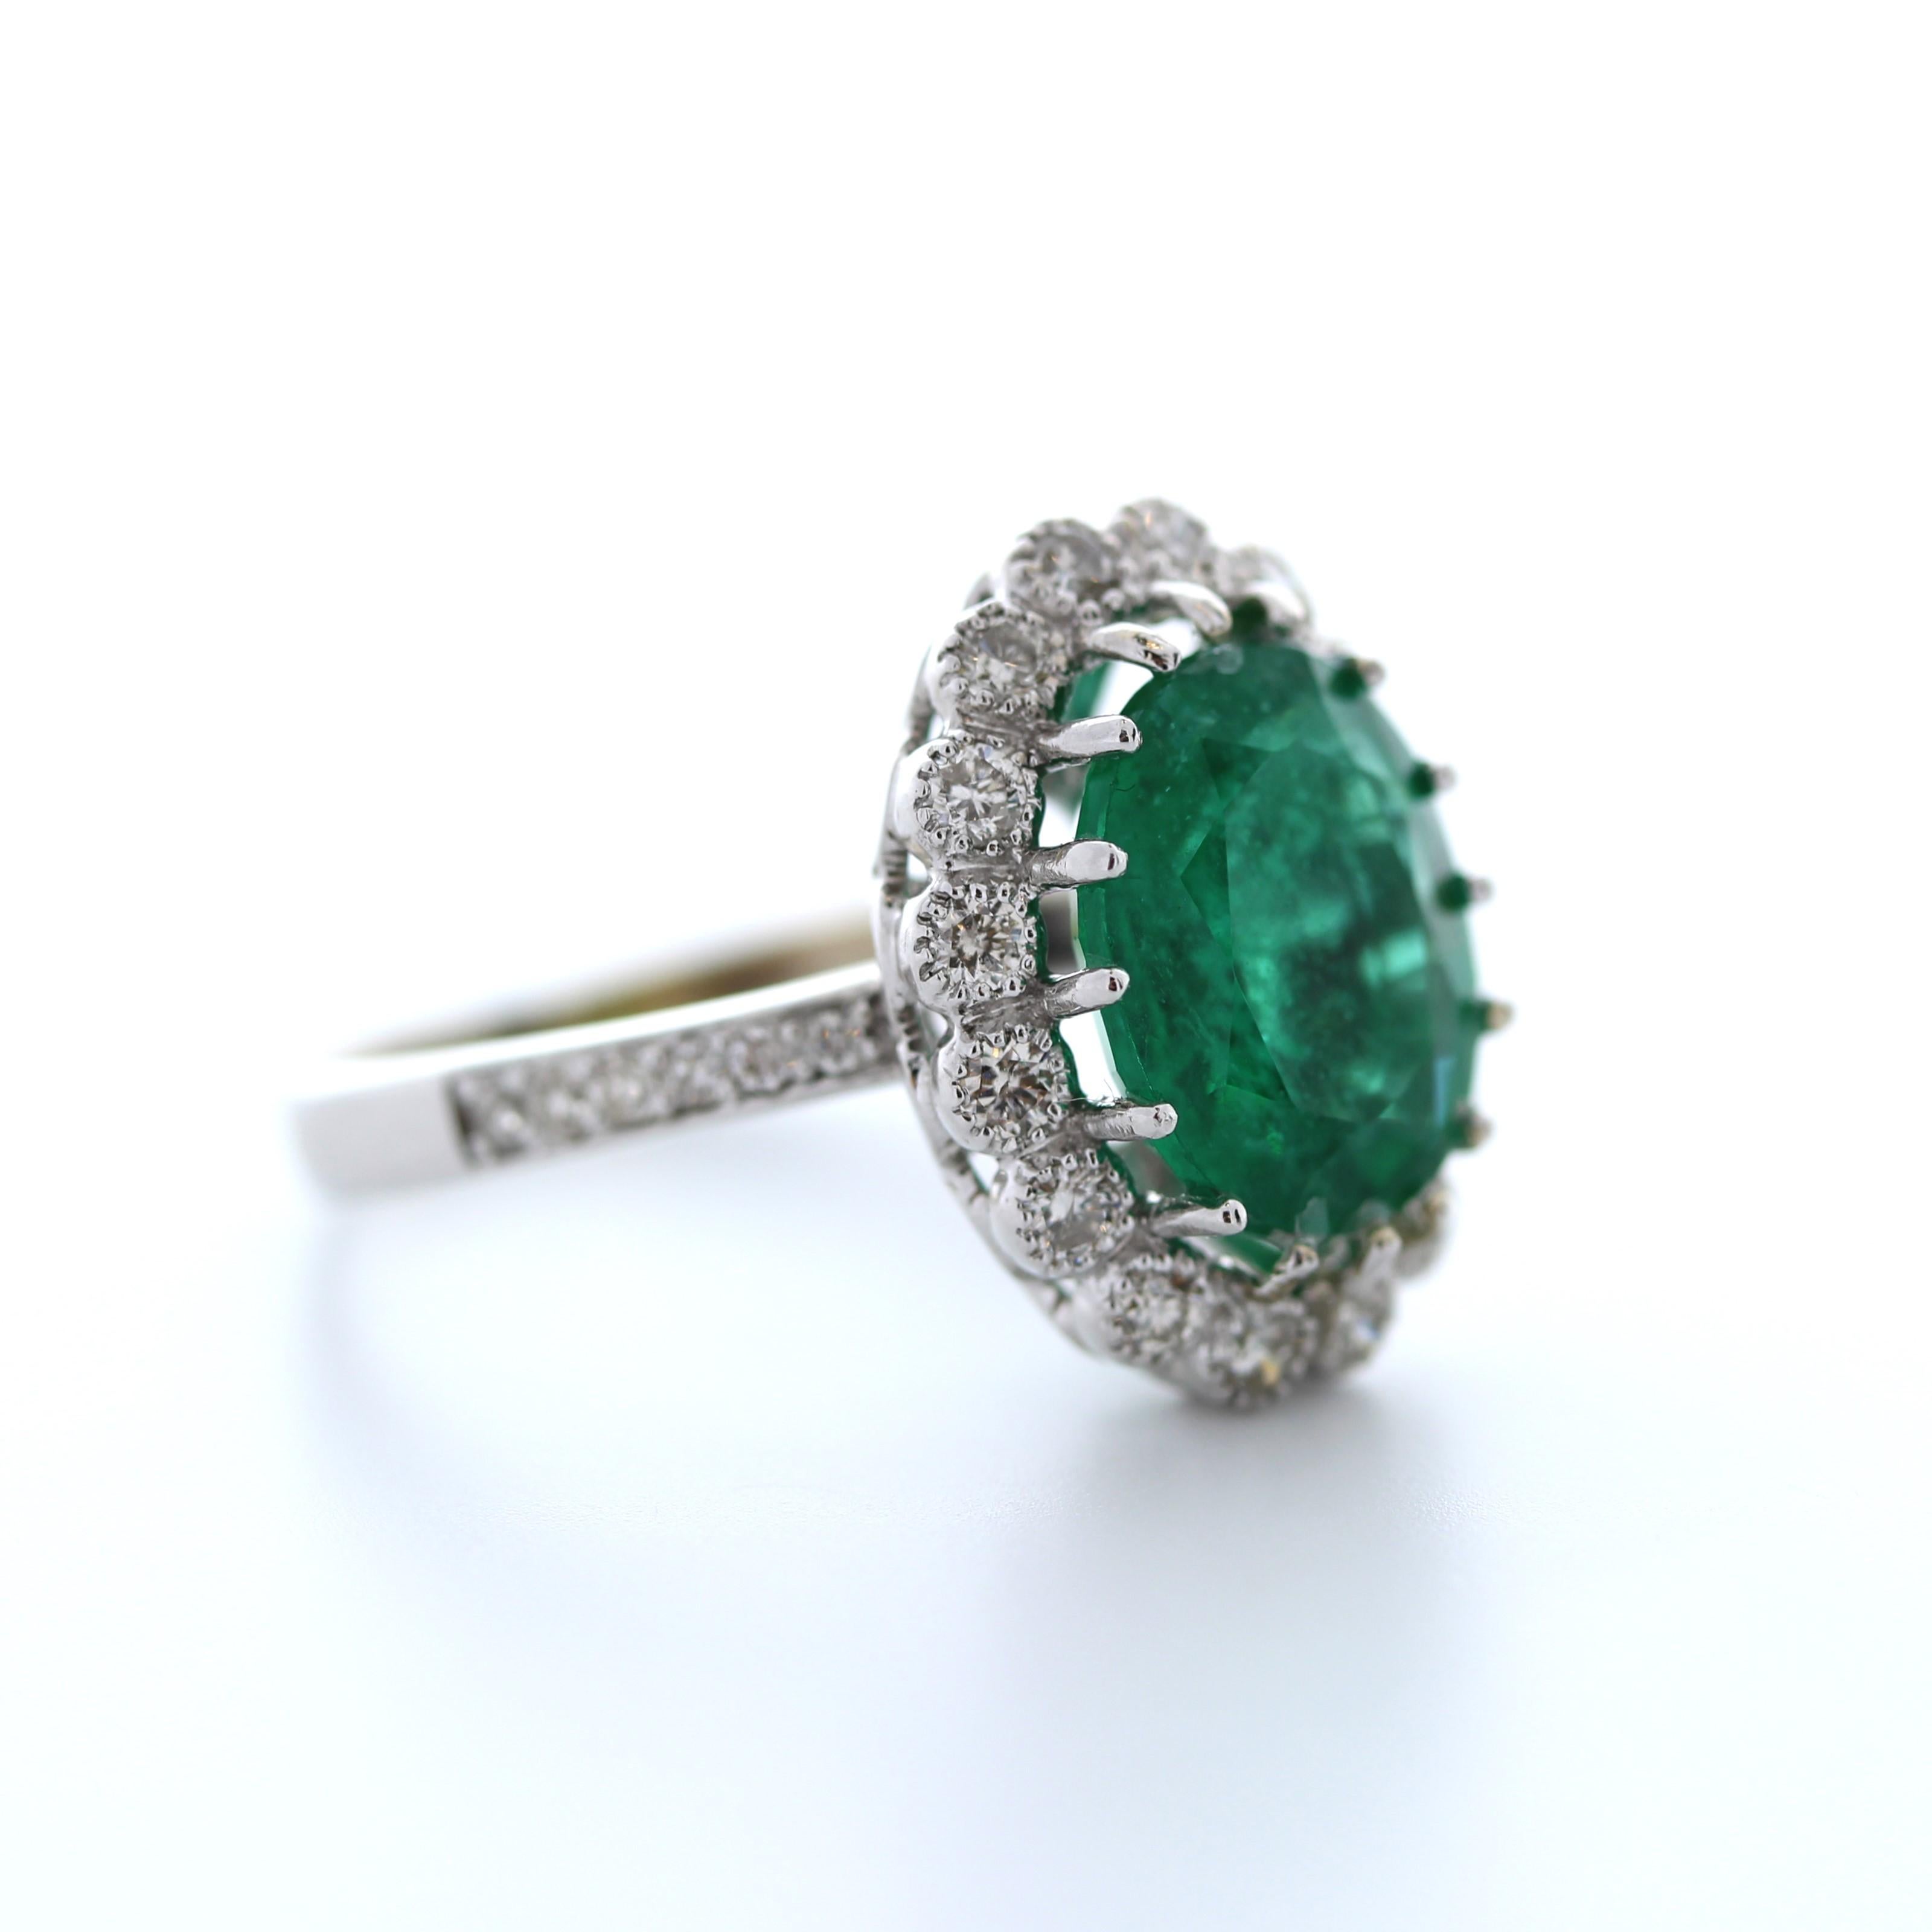 The 4.46 Carat Green Emerald Oval Shape & Diamond Ring in 14K White Gold is a stunning piece of jewelry that features a vibrant green emerald as its centerpiece. The emerald is an oval-cut shape, which gives it a classic and elegant look. The